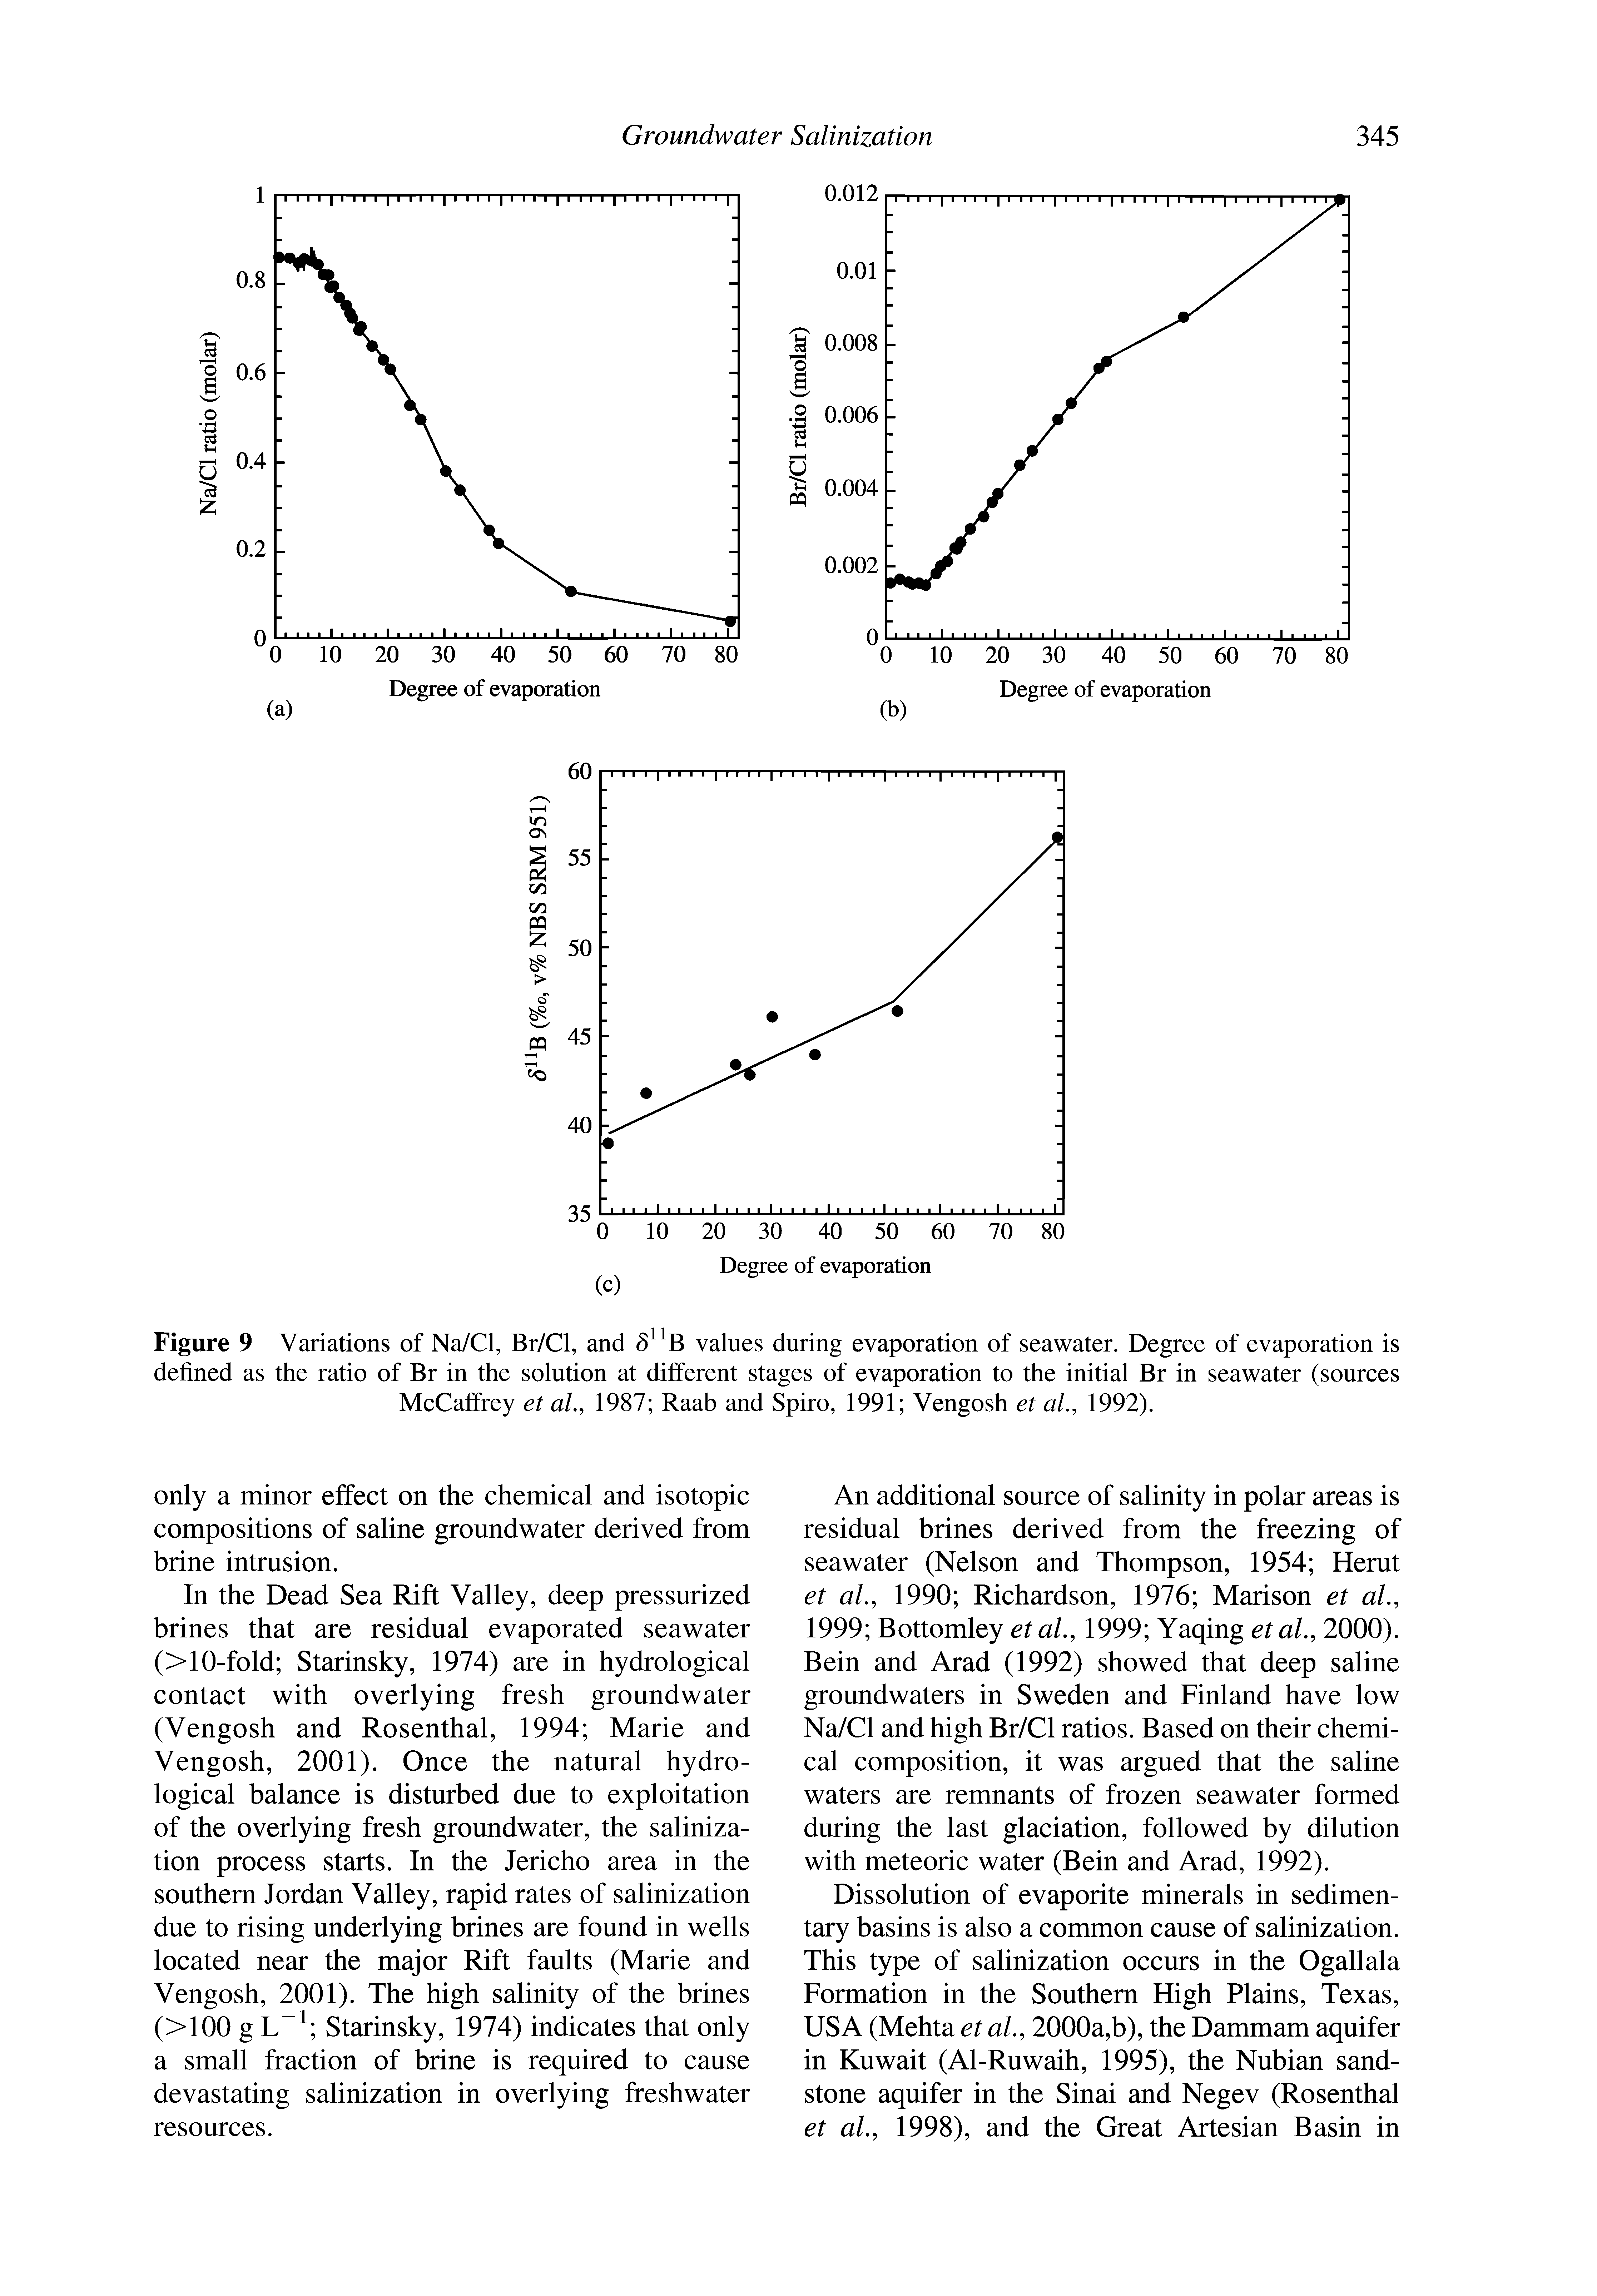 Figure 9 Variations of Na/Cl, Br/Cl, and values during evaporation of seawater. Degree of evaporation is defined as the ratio of Br in the solution at different stages of evaporation to the initial Br in seawater (sources McCaffrey et al., 1987 Raab and Spiro, 1991 Vengosh et al., 1992).